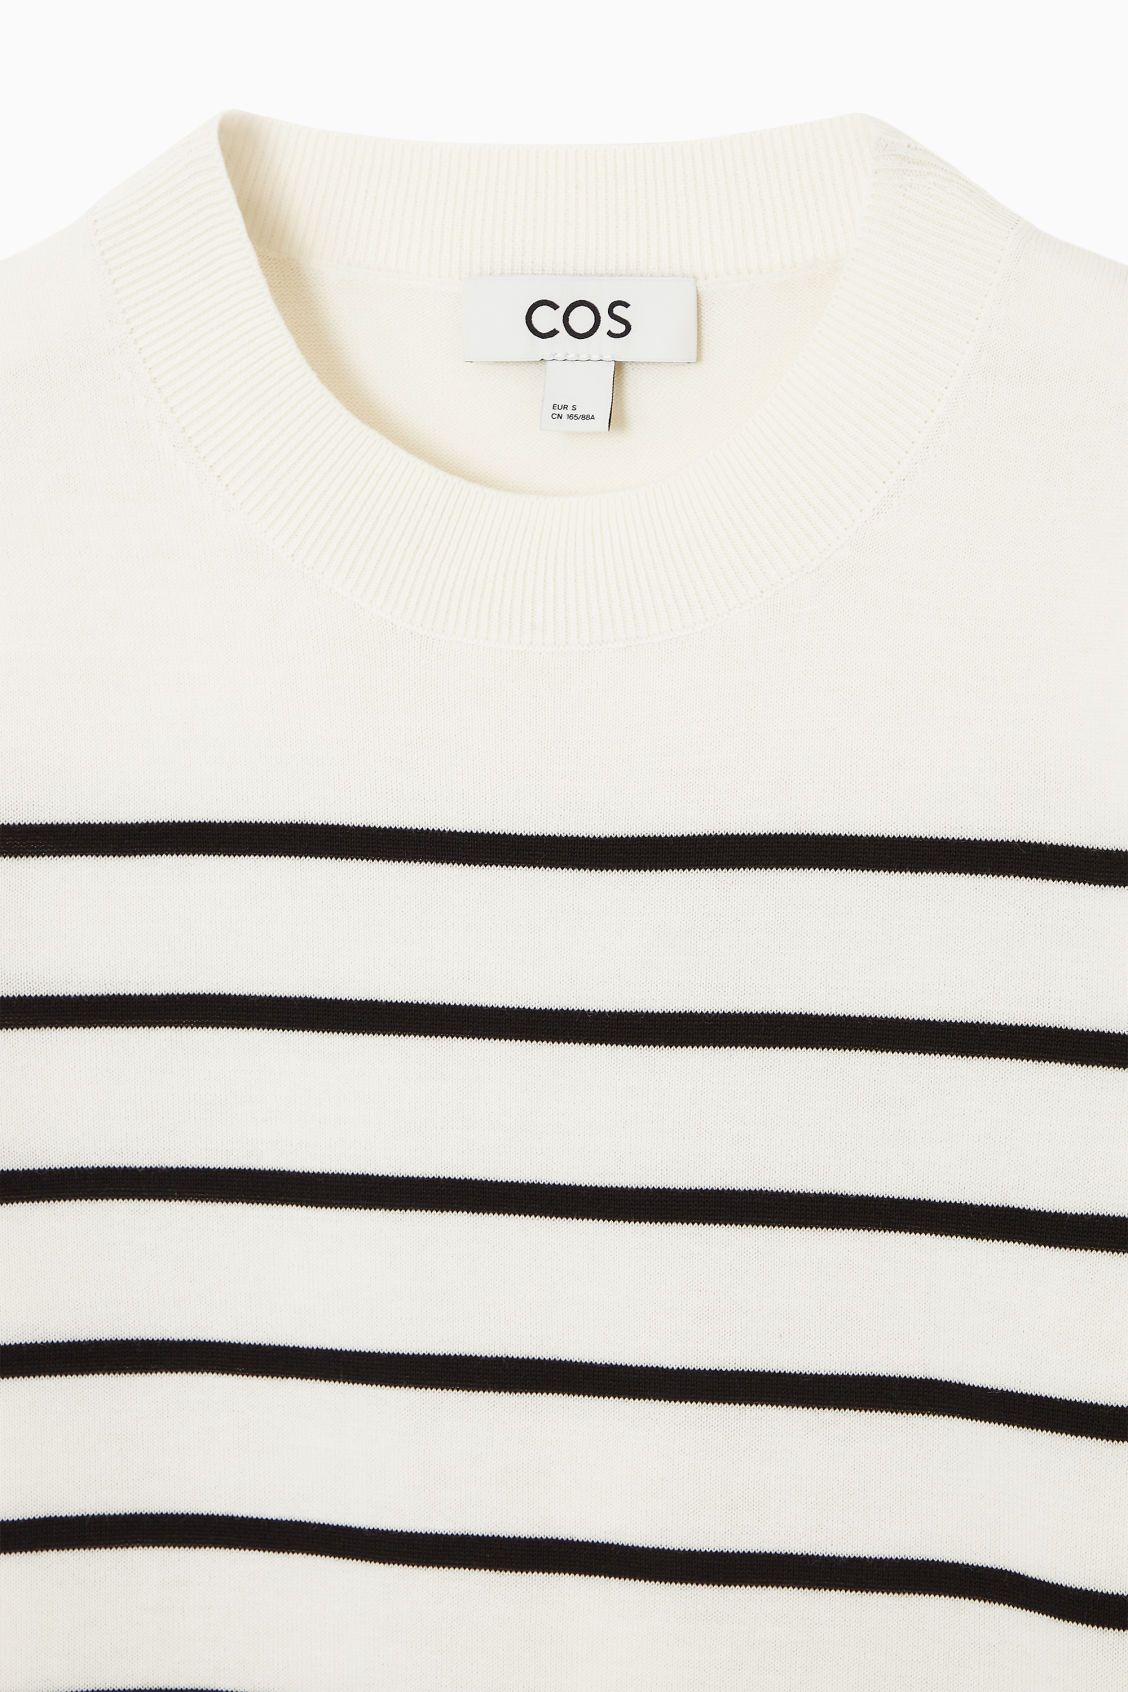 SHORT-SLEEVE KNITTED T-SHIRT - OFF-WHITE / STRIPED - COS | COS UK